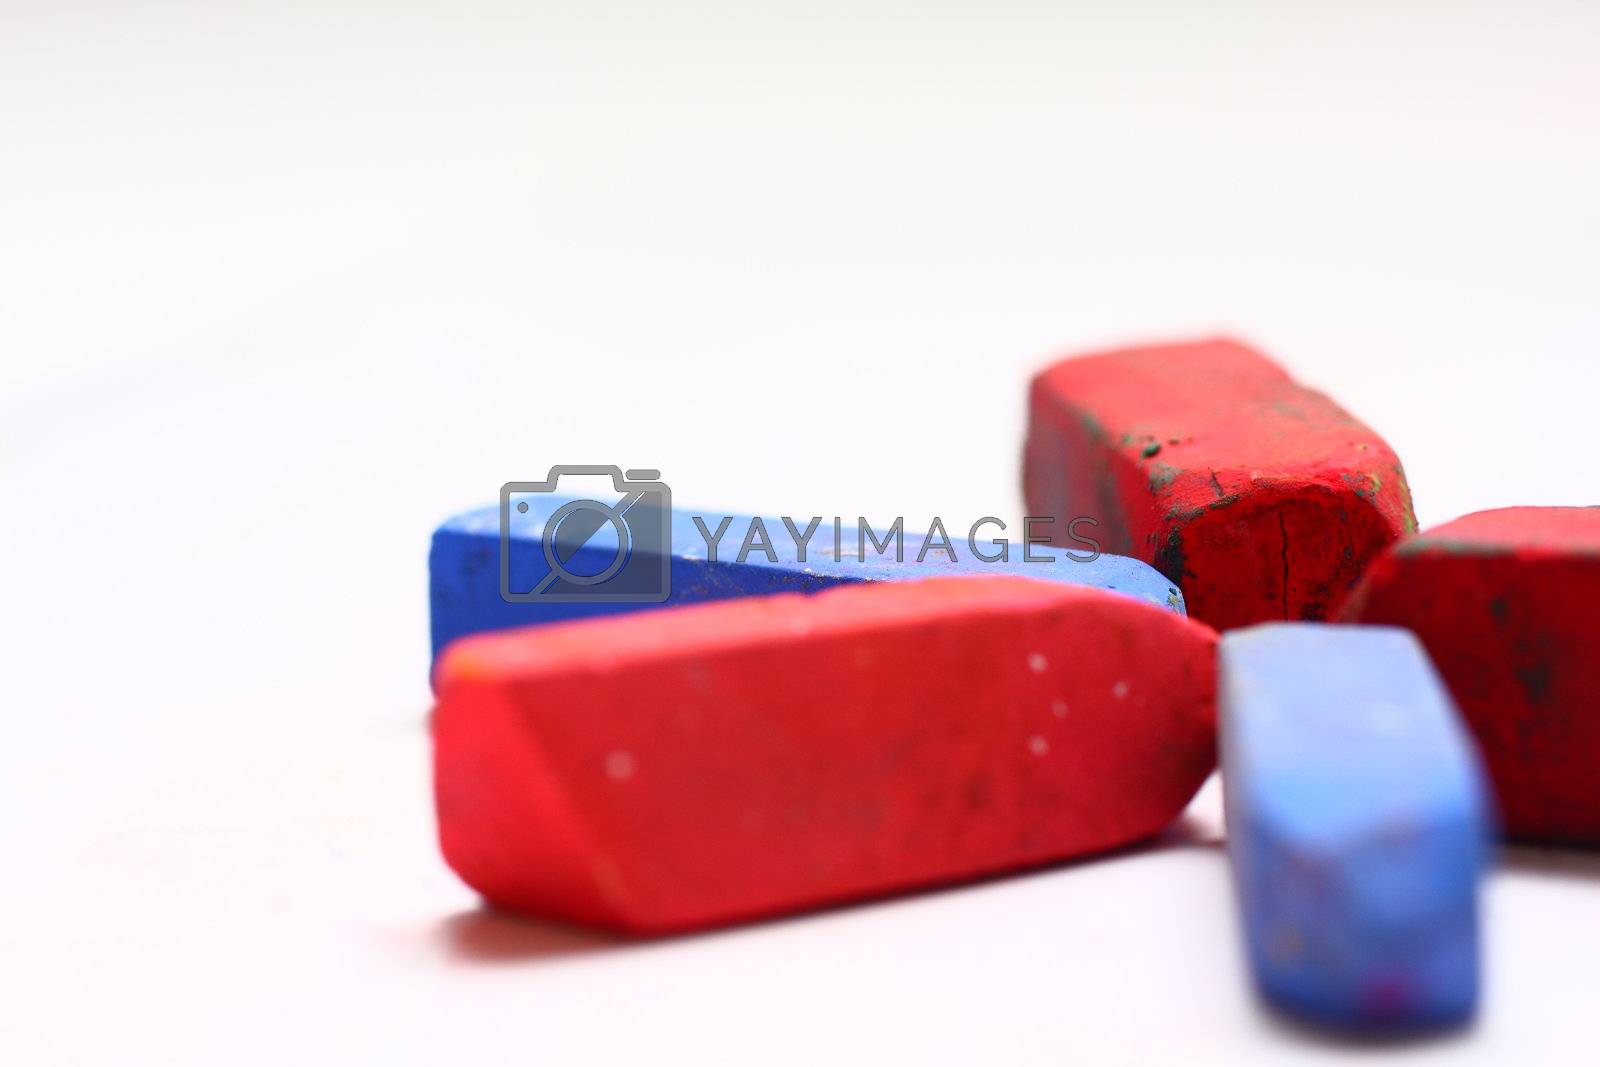 Royalty free image of Red and Blue Chalk Pastels by dersankt